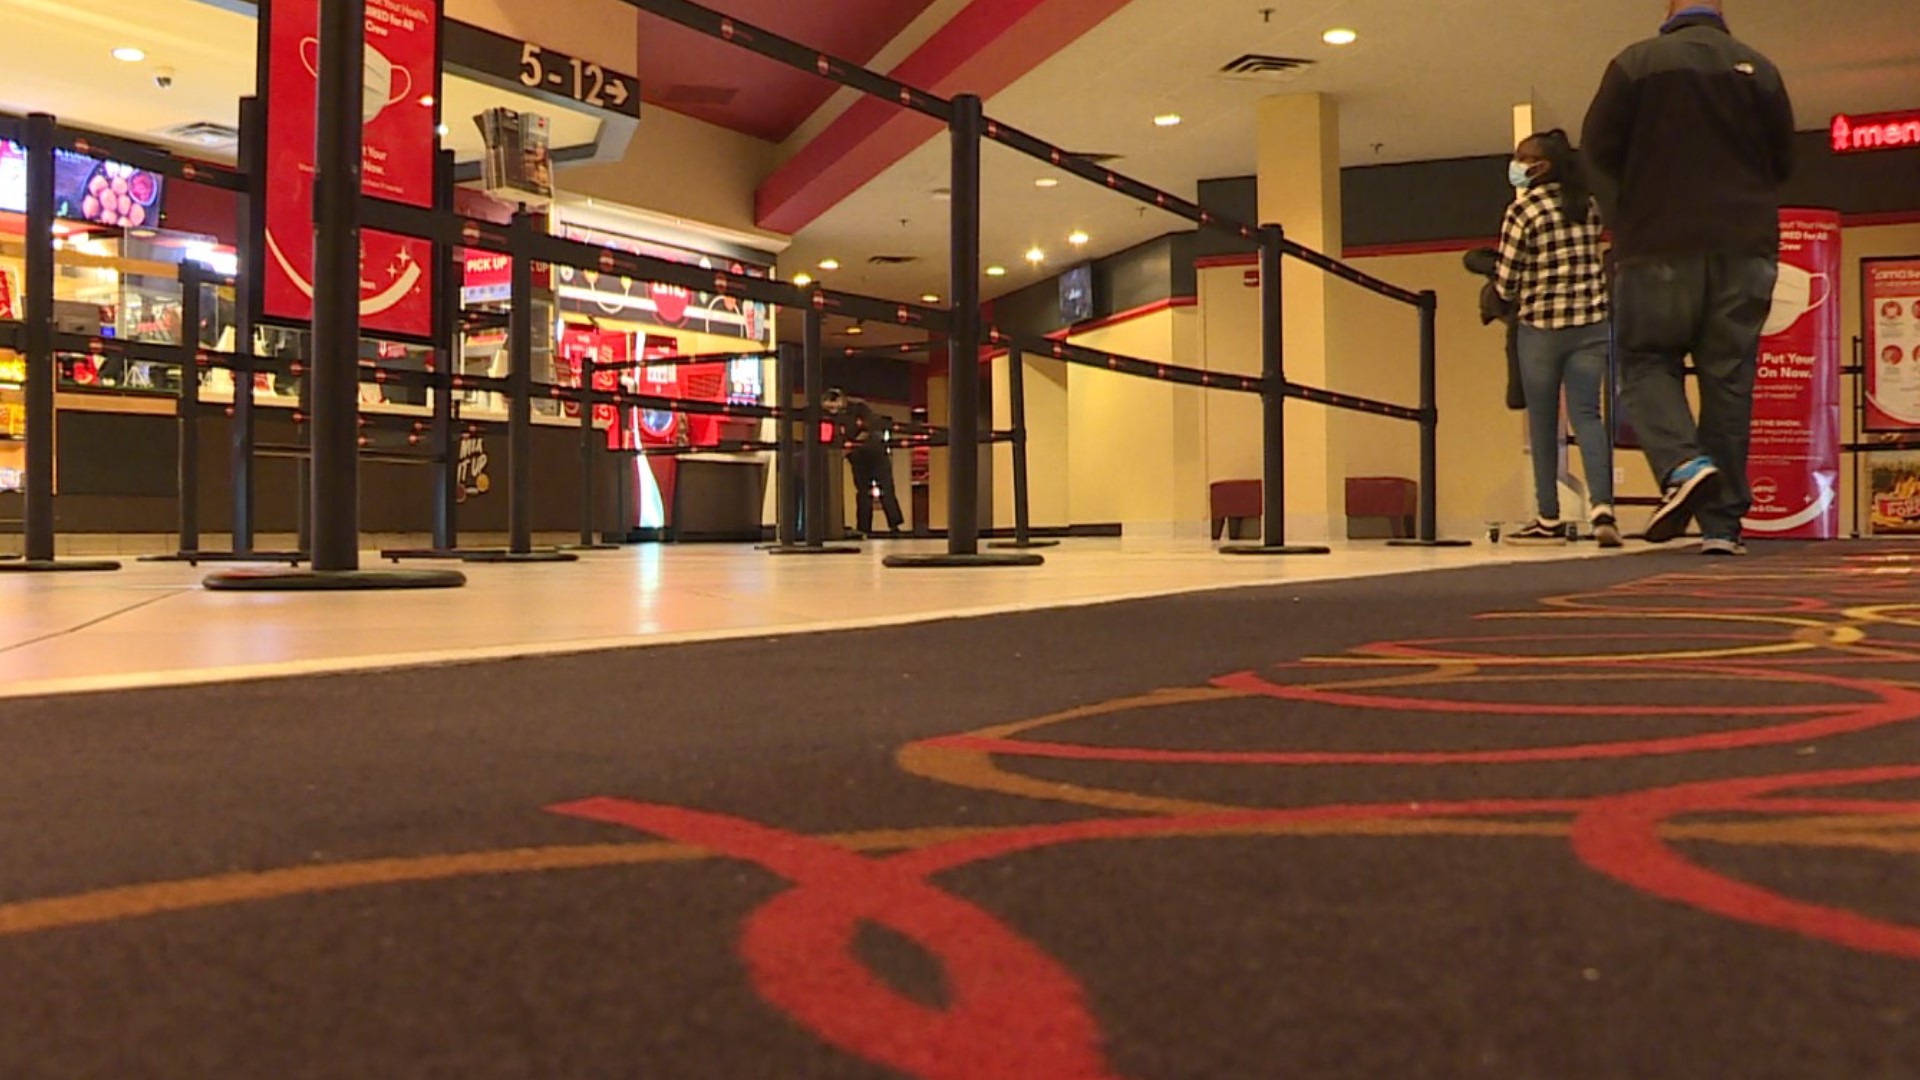 A year after closing due to the pandemic, four AMC movie theaters in Prince George's County reopened on Friday.